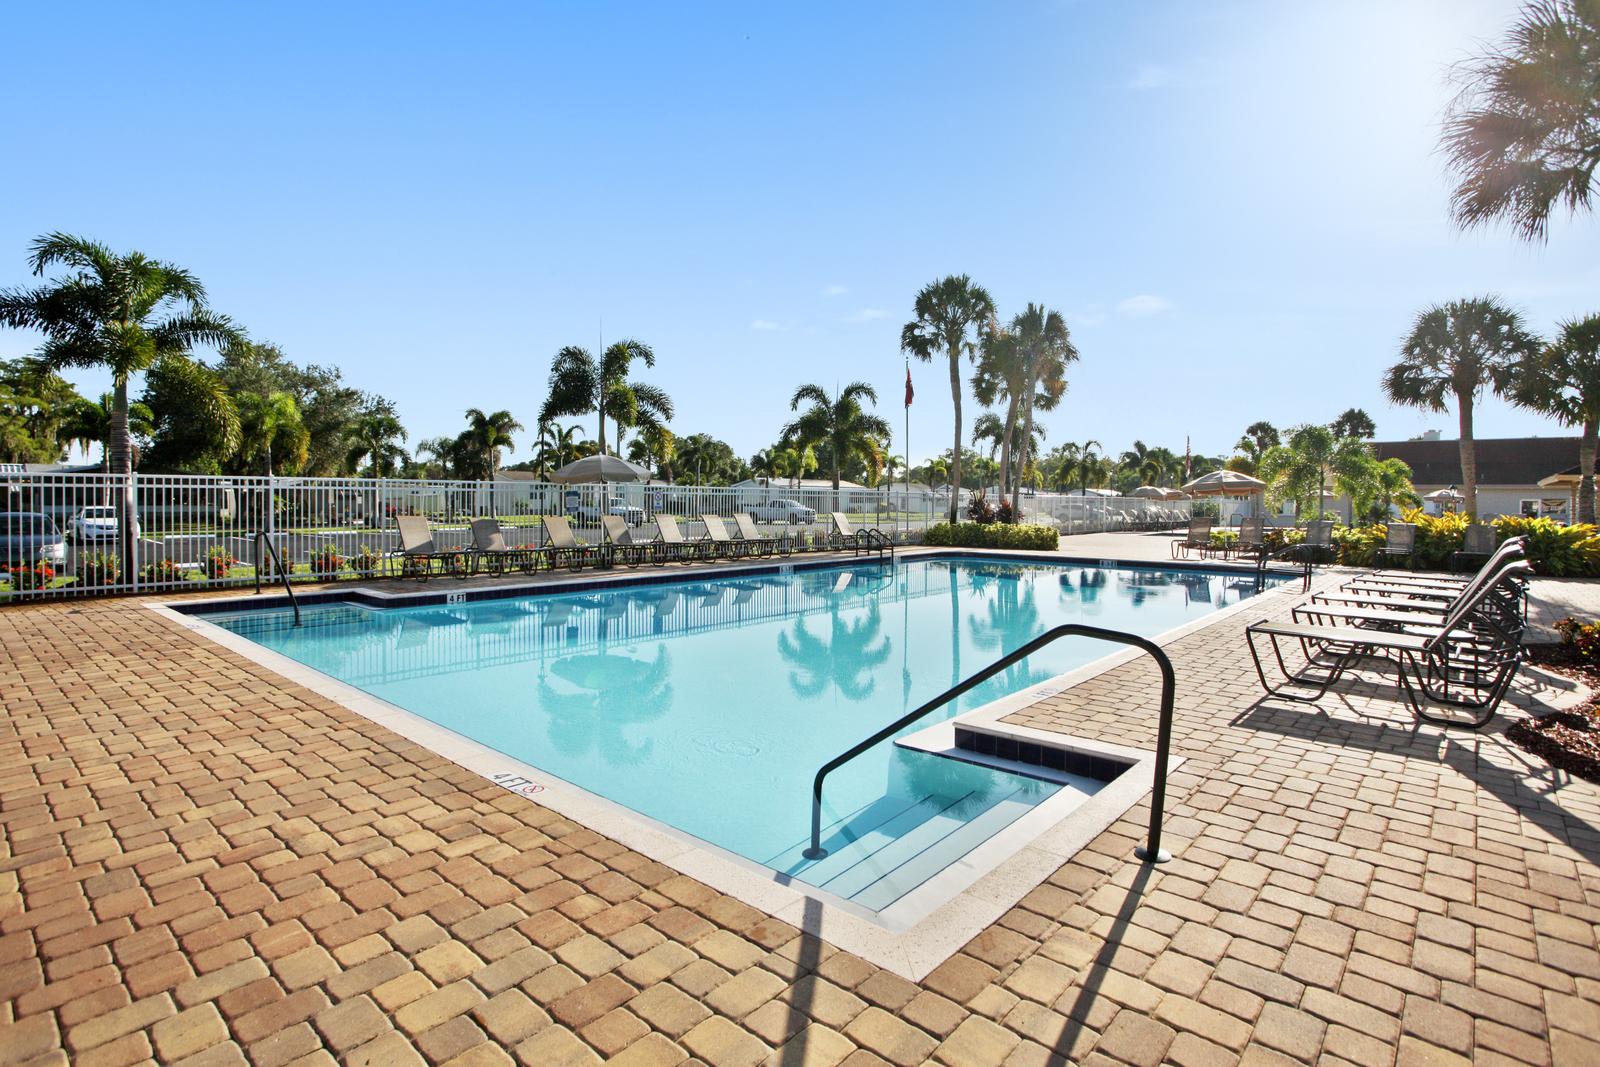 Fountainview Estates, an active 55 plus community in Tampa Florida with clean pool and lounge chairs surround pool area.